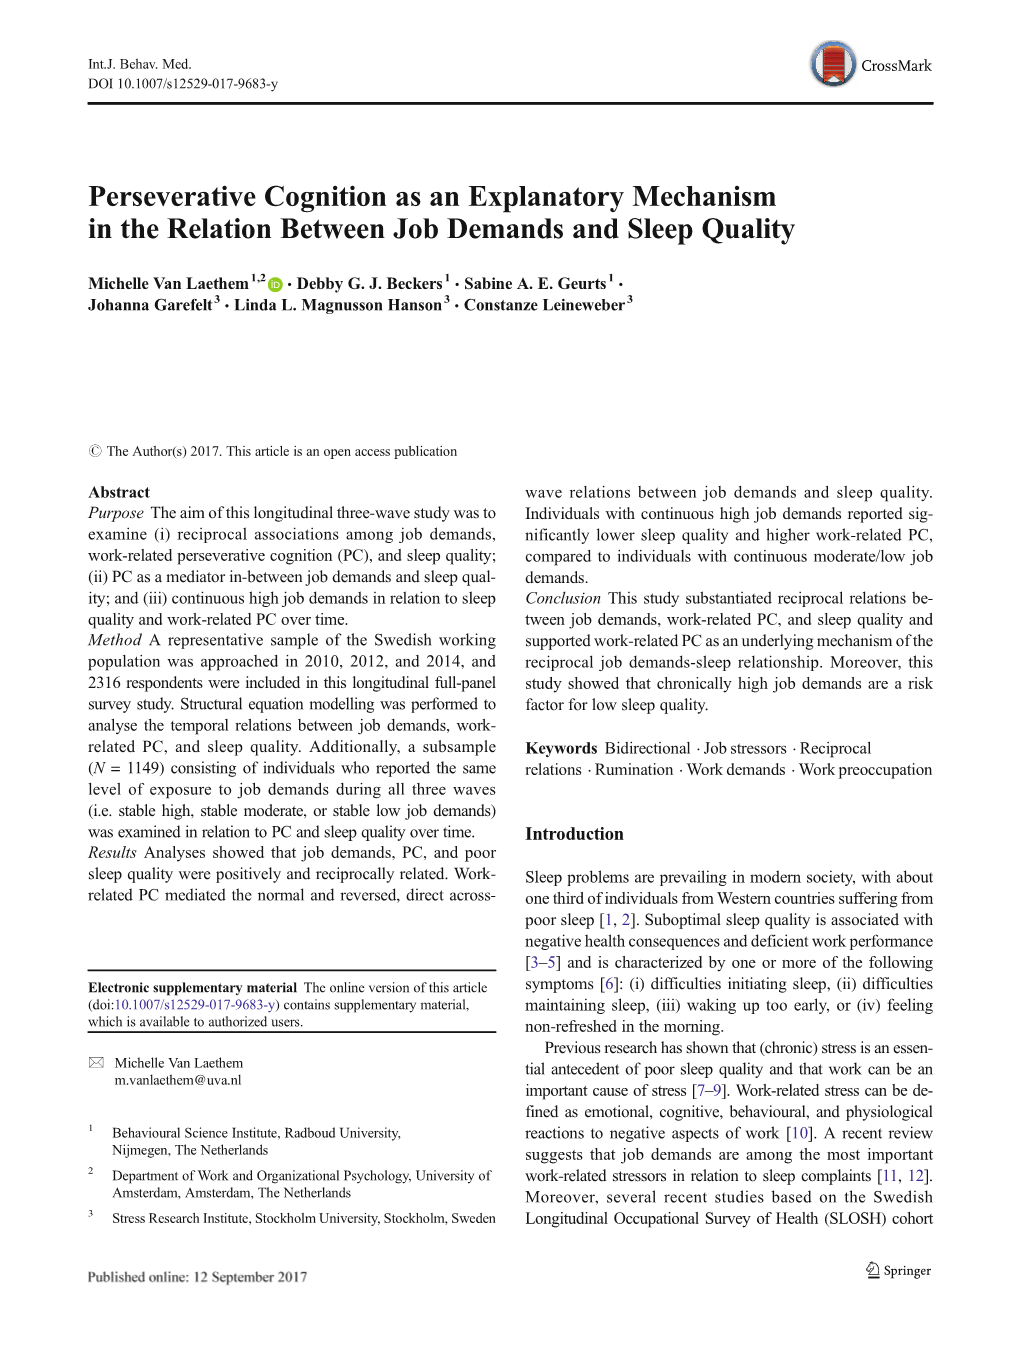 Perseverative Cognition As an Explanatory Mechanism in the Relation Between Job Demands and Sleep Quality